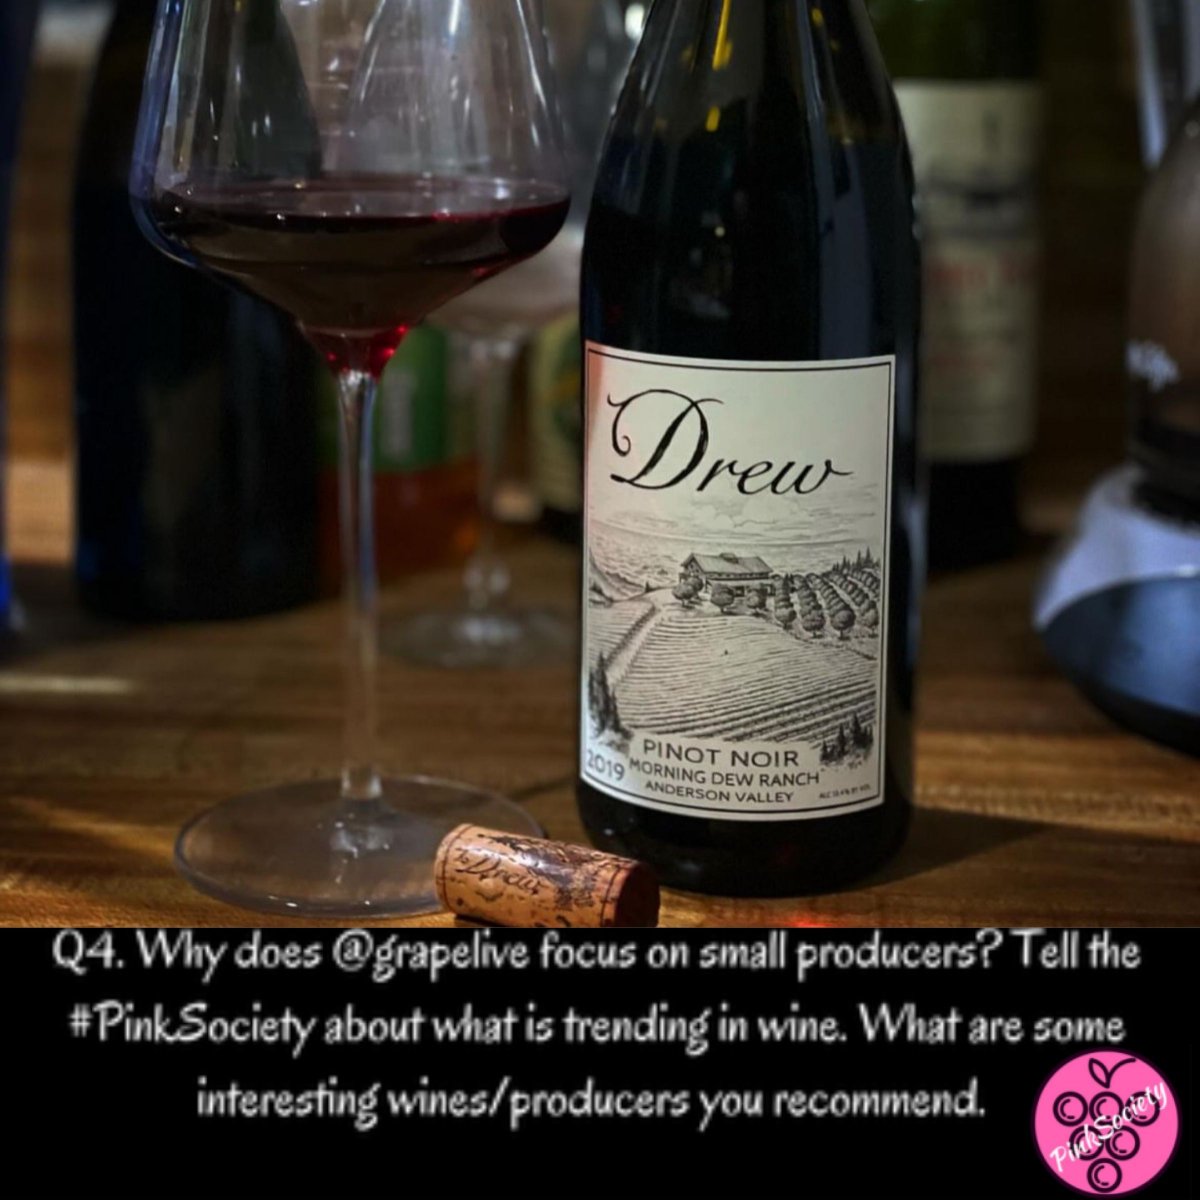 Q4. Why does @grapelive focus on small producers? Tell the #PinkSociety about what is trending in wine. What are some interesting wines/ producers you recommend. @boozychef @jflorez @_drazzari @myvinespot @Kerryloves2trvl @AskRobY @redwinecats @WineOnTheDime